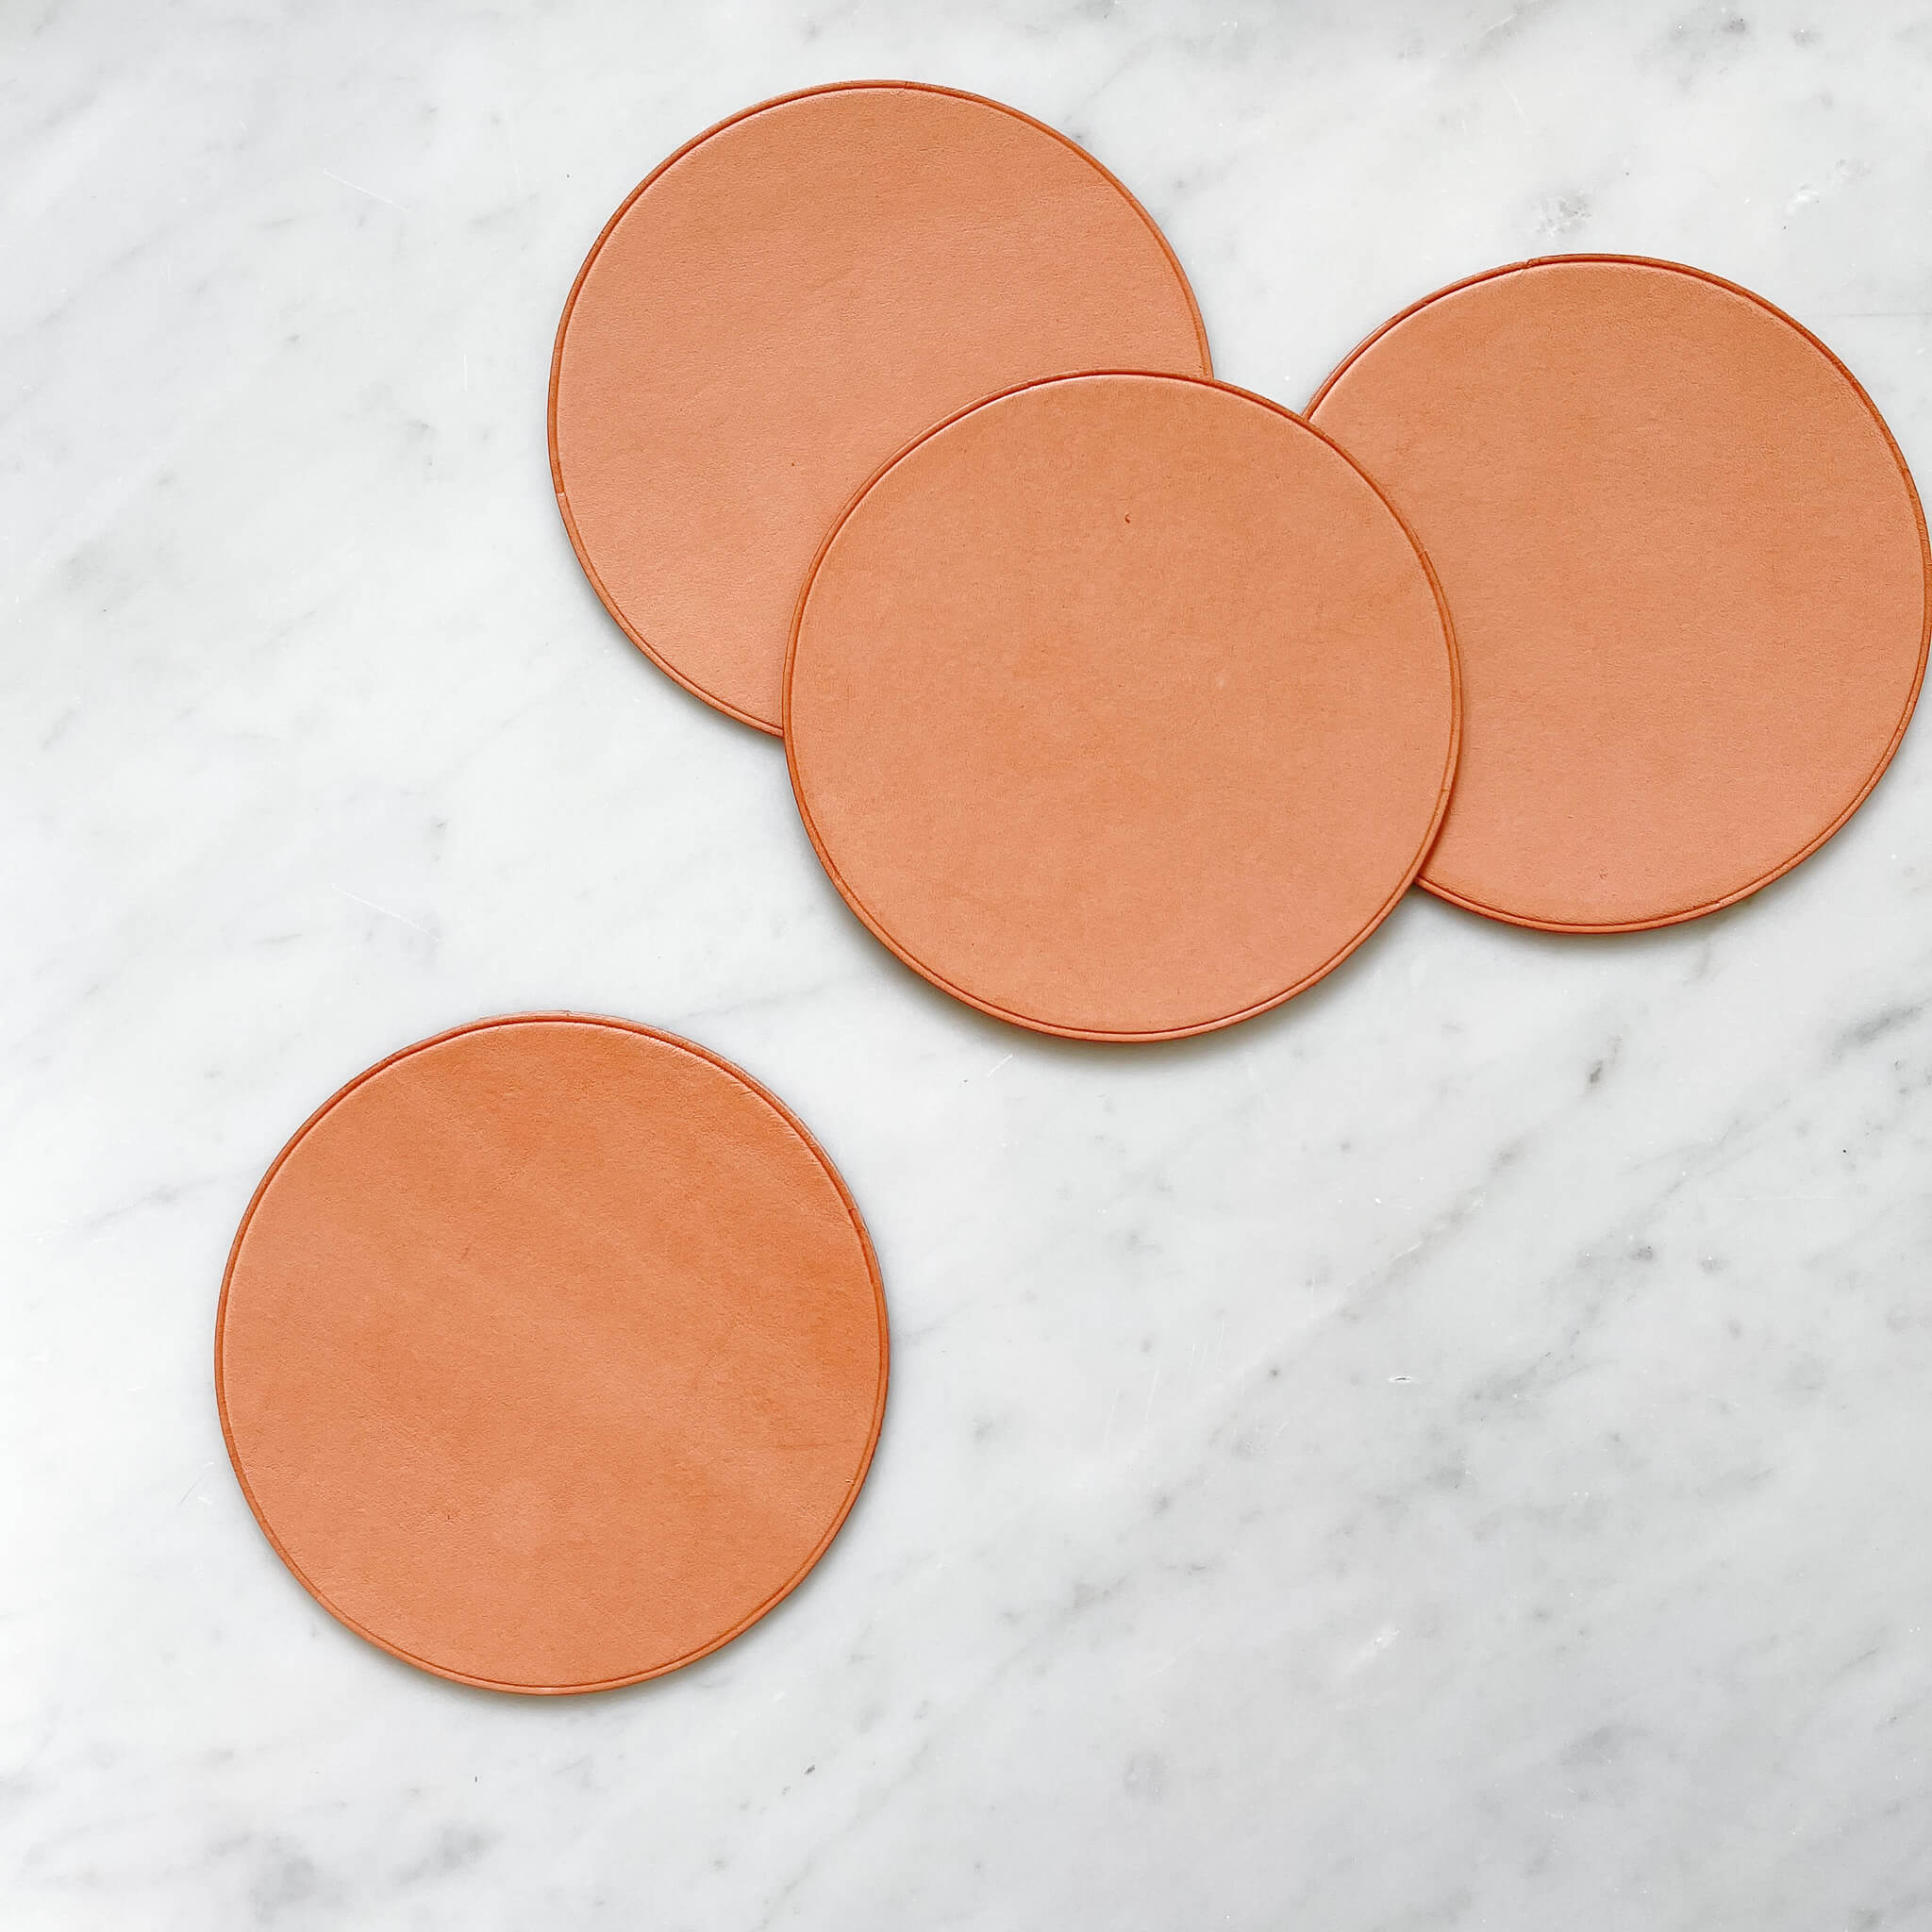 A set of 4 Baja leather coasters in natural nude.